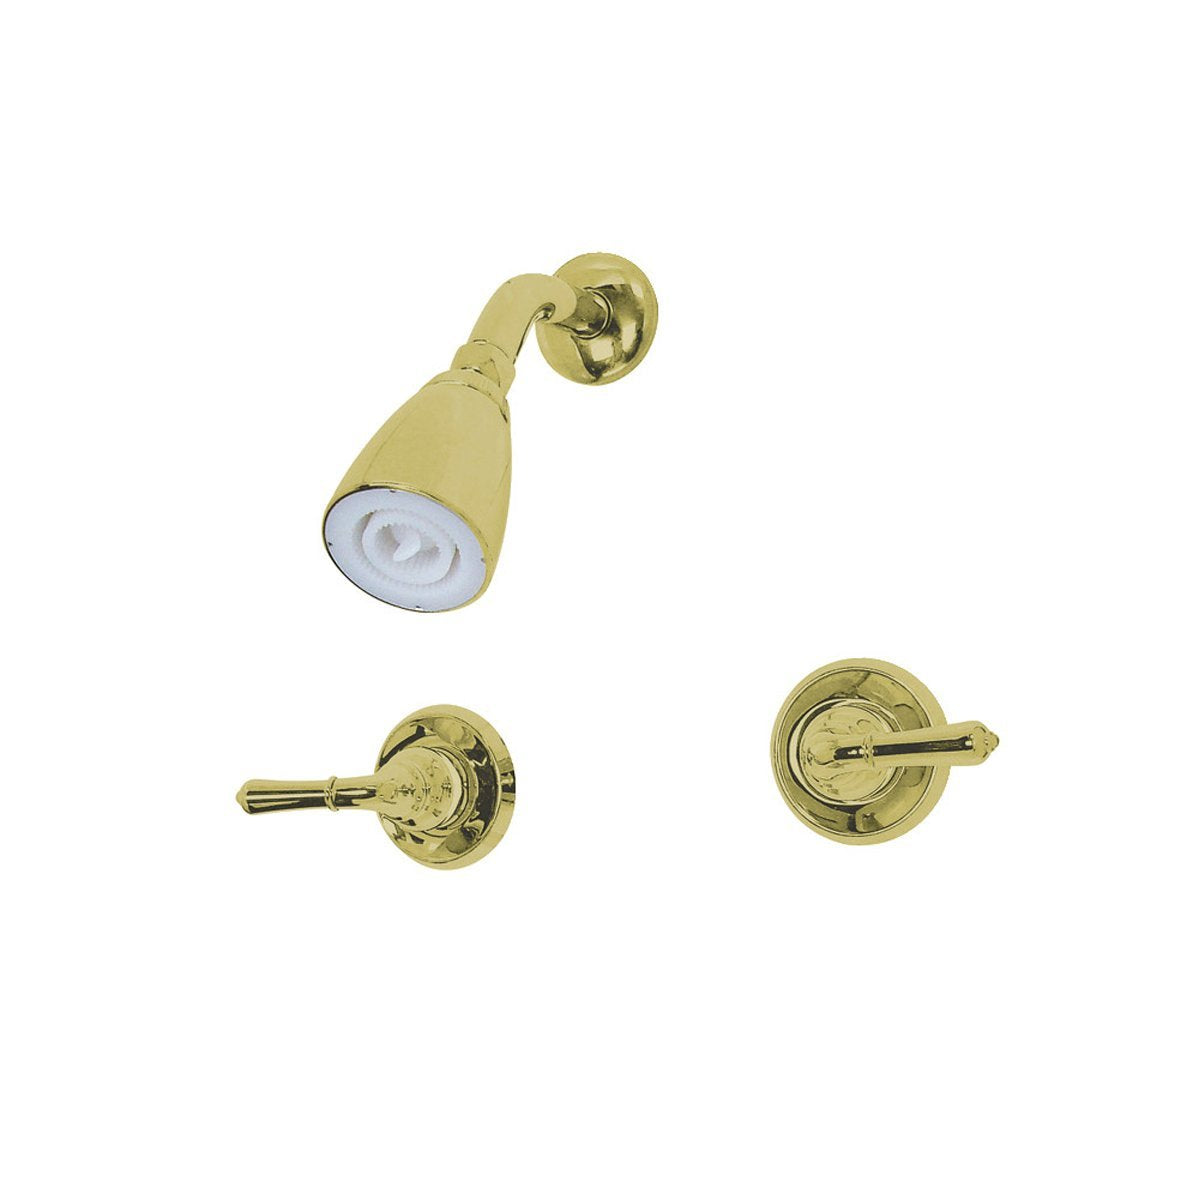 Kingston Brass Magellan Tub and Shower Faucet, Shower Only